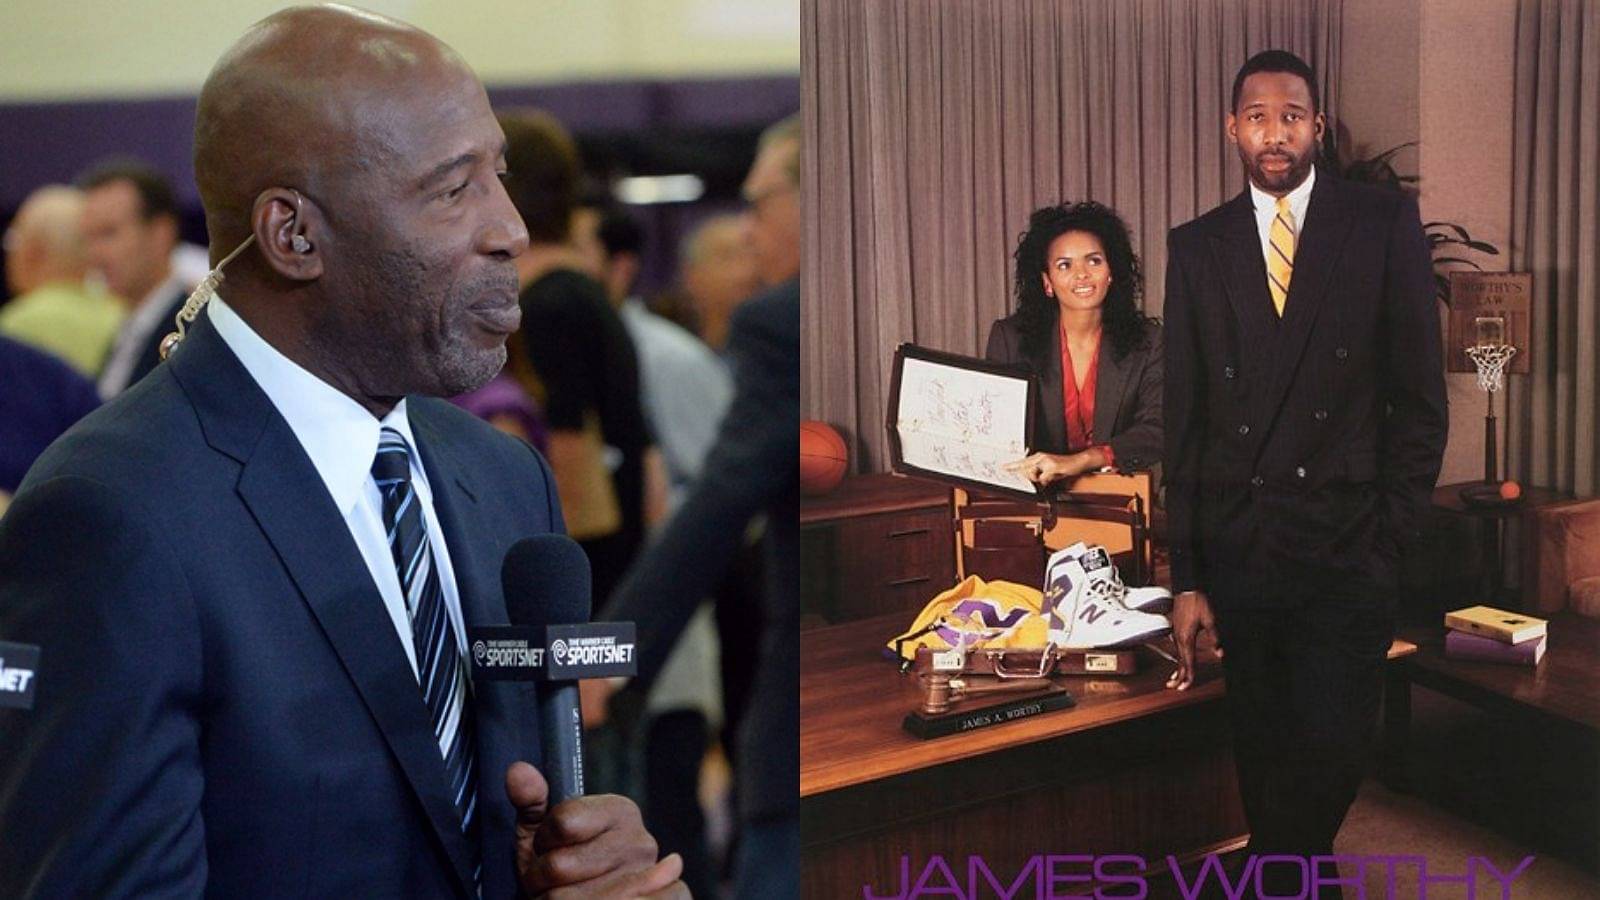 “James Worthy and Magic Johnson used to run trains on cheerleaders during halftime": Lakers legend gets mocked after trying to roast current generation of players